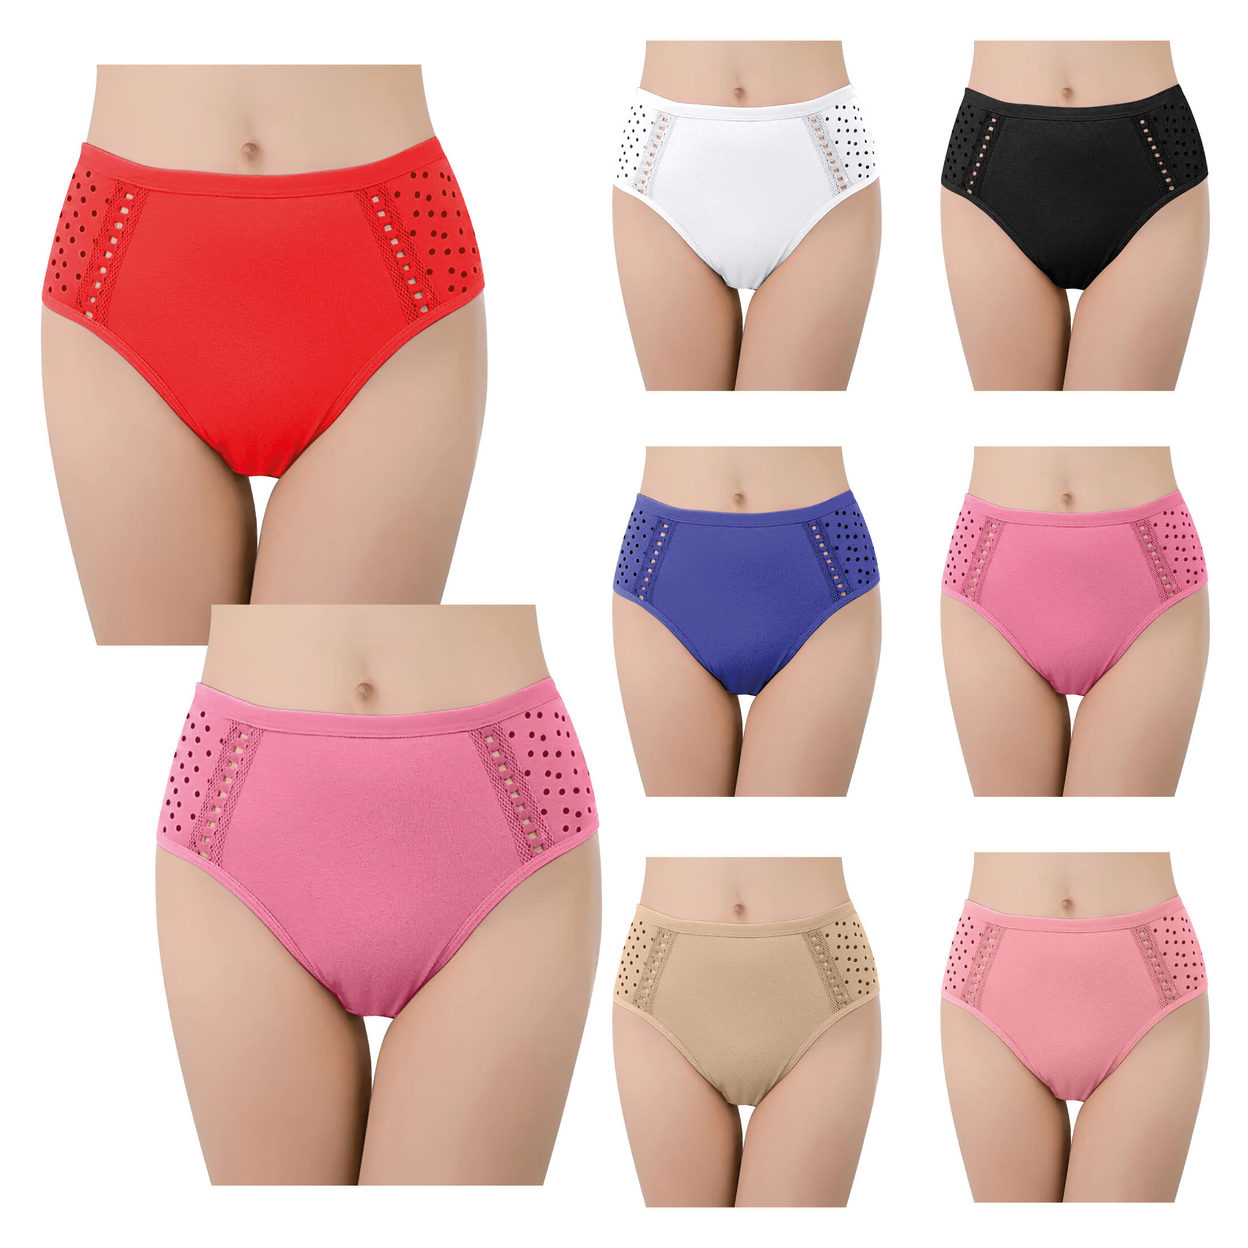 5-Pack: Women's Ultra Soft Moisture Wicking Panties Cotton Perfect Fit Underwear (Plus Sizes Available) - Large